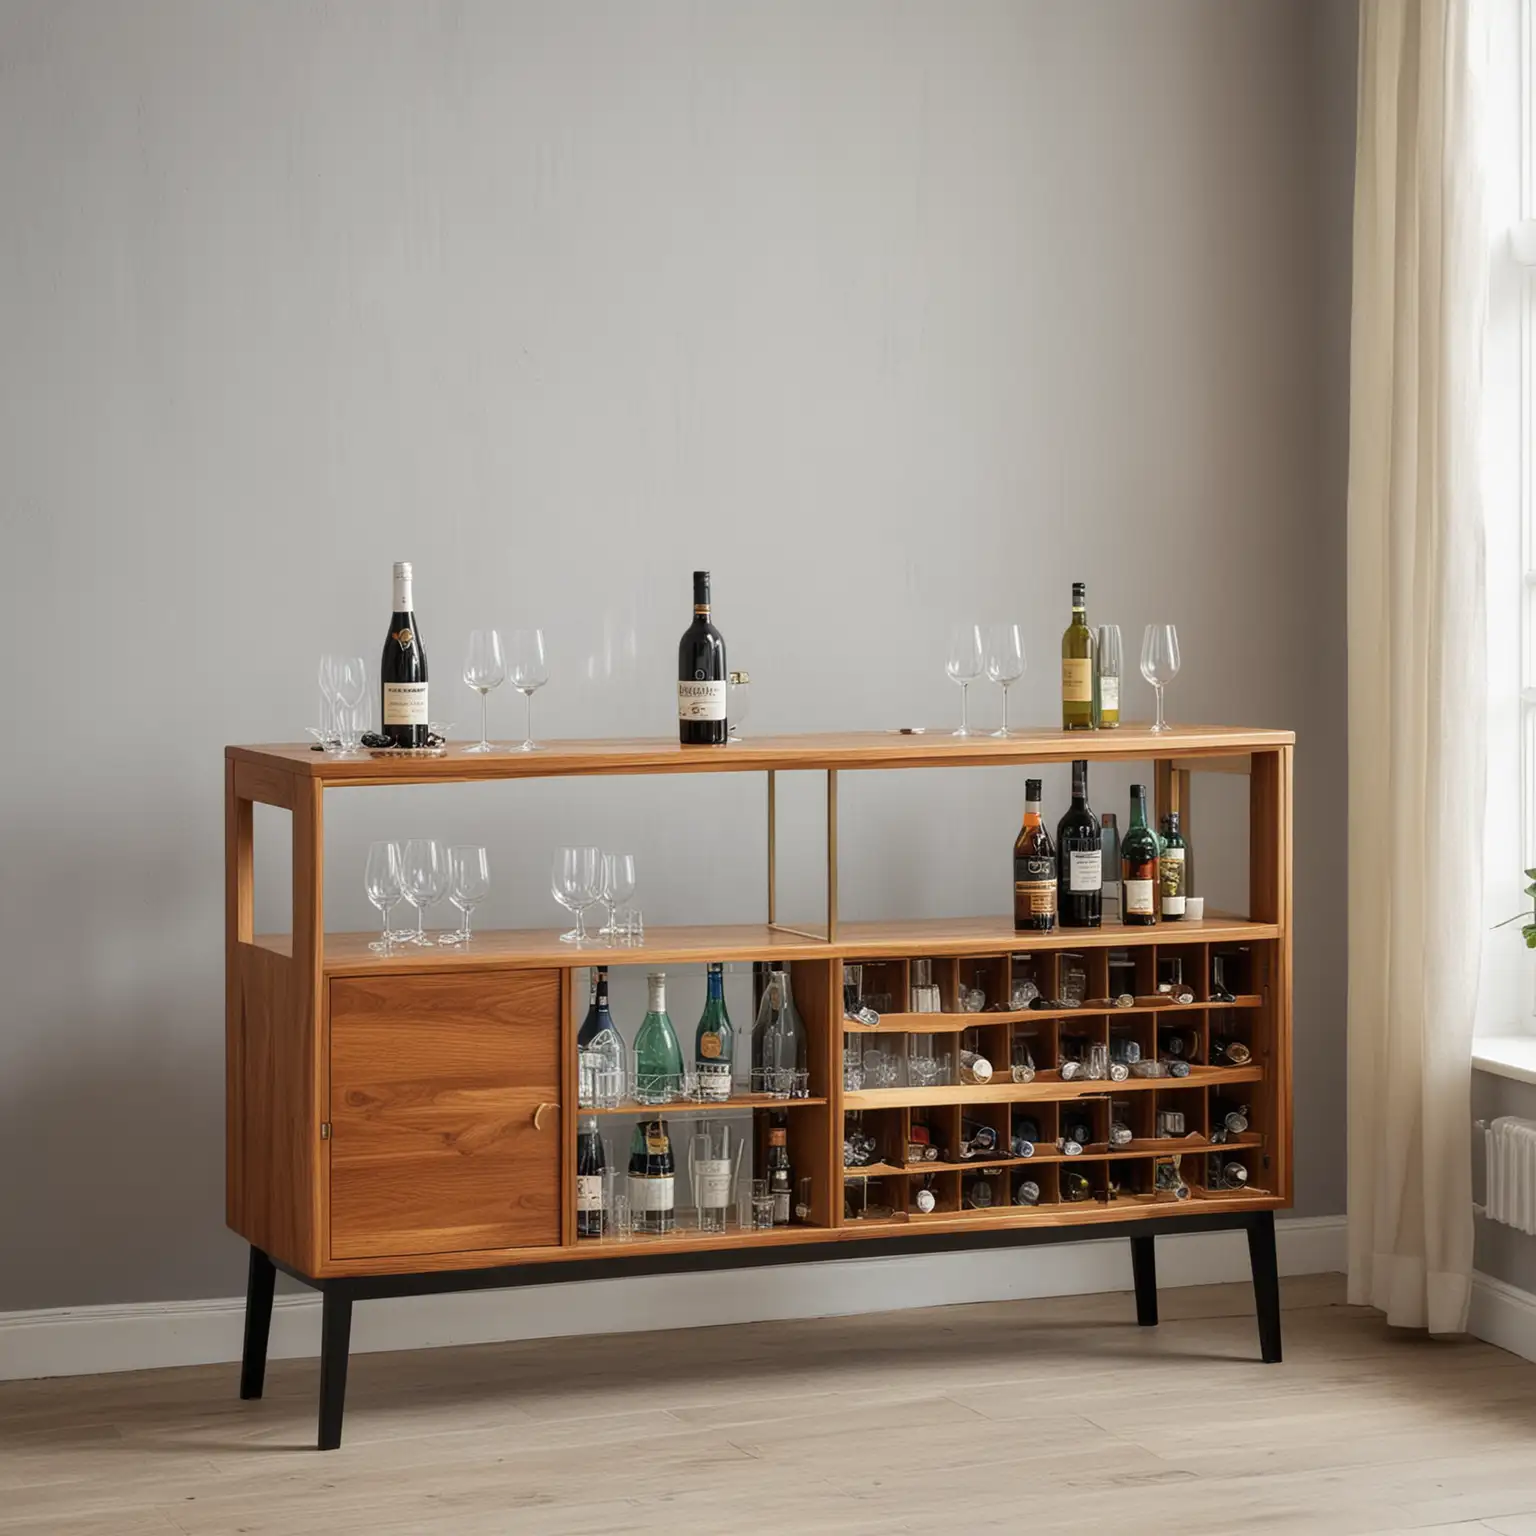 Midcentury Bar Table with Storage by Large Window